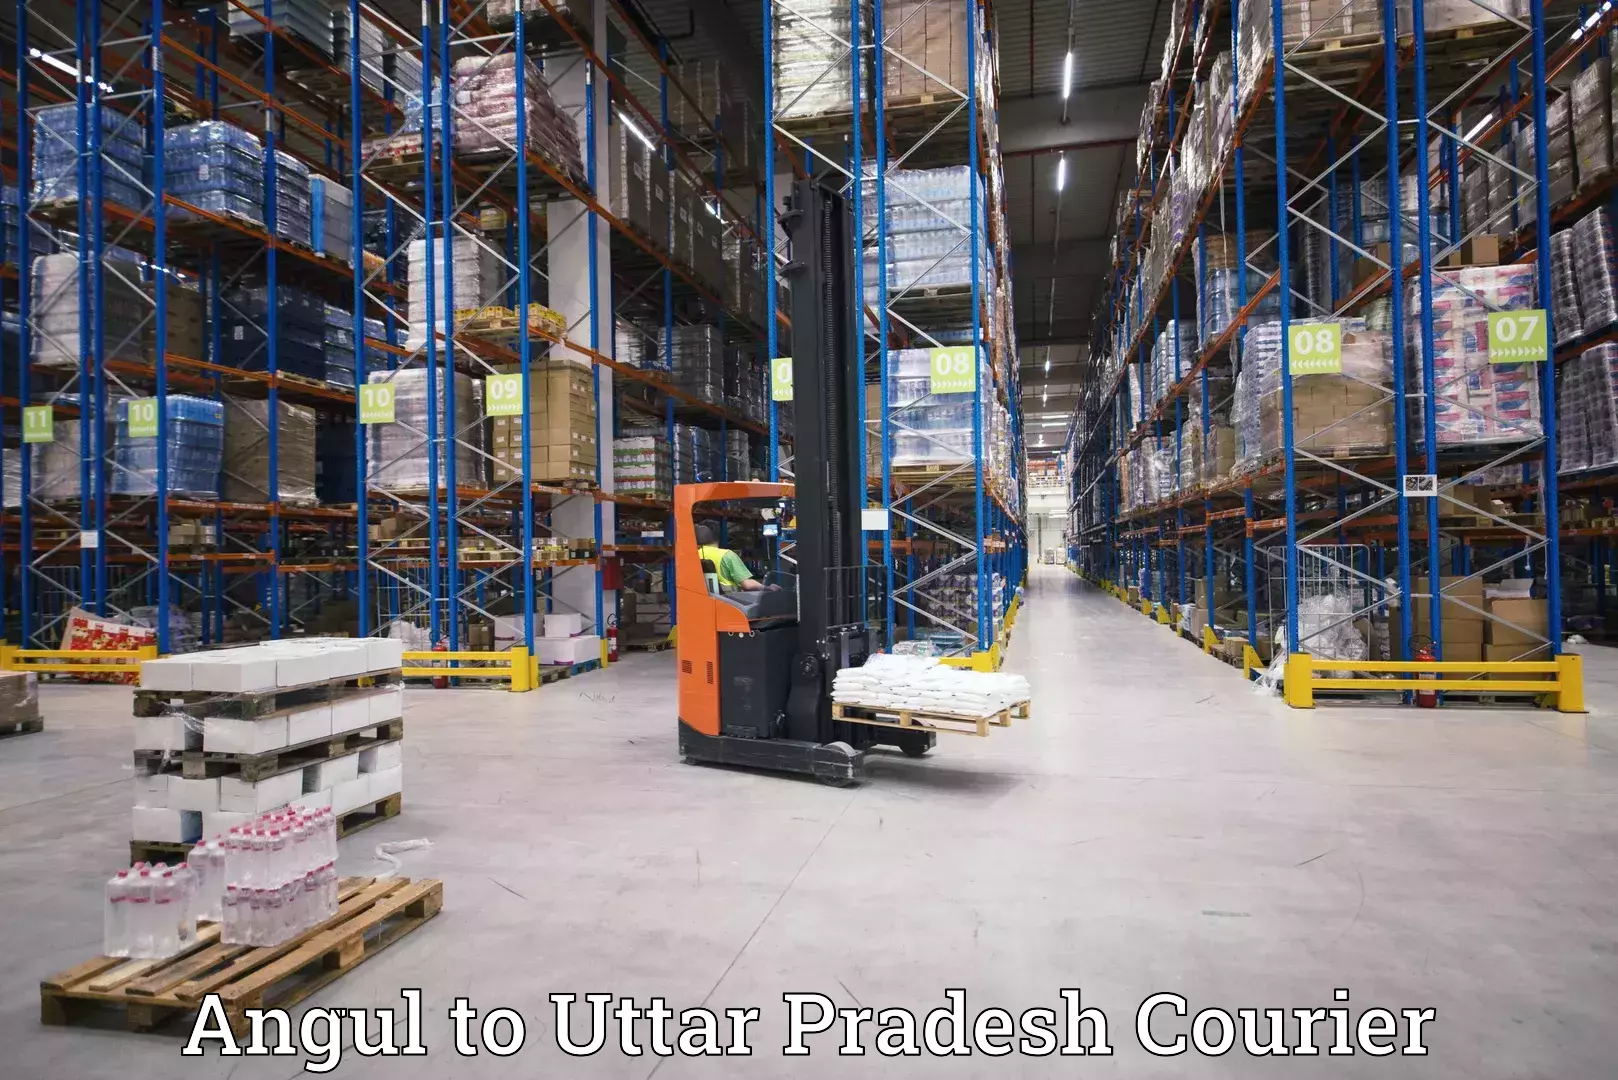 Round-the-clock parcel delivery Angul to Dhampur